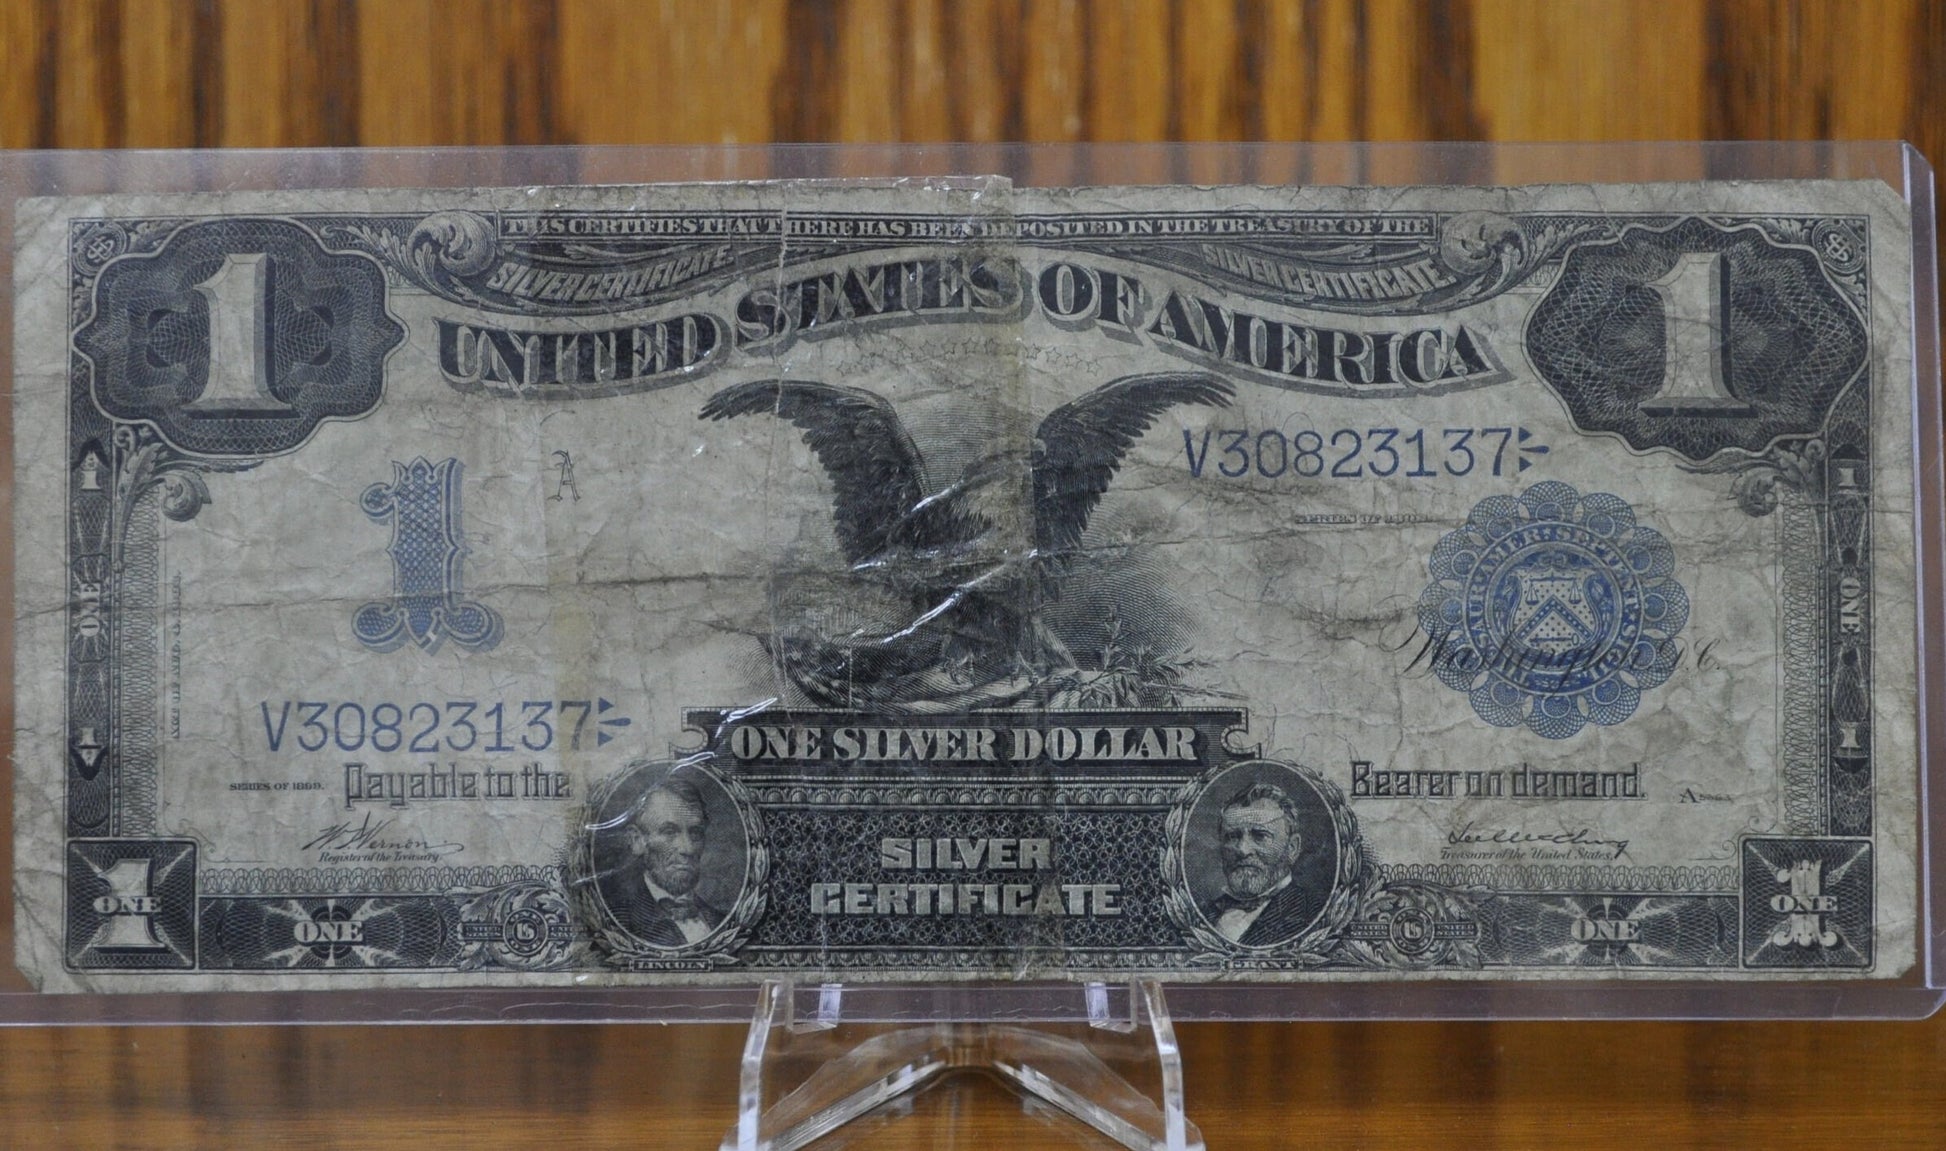 1899 1 Dollar Silver Cert. Black Eagle Fr#229 - VG but torn and Taped, Cull Grade - 1899 Large Note 1 Dollar Bill 1899 Silver Cert Fr229